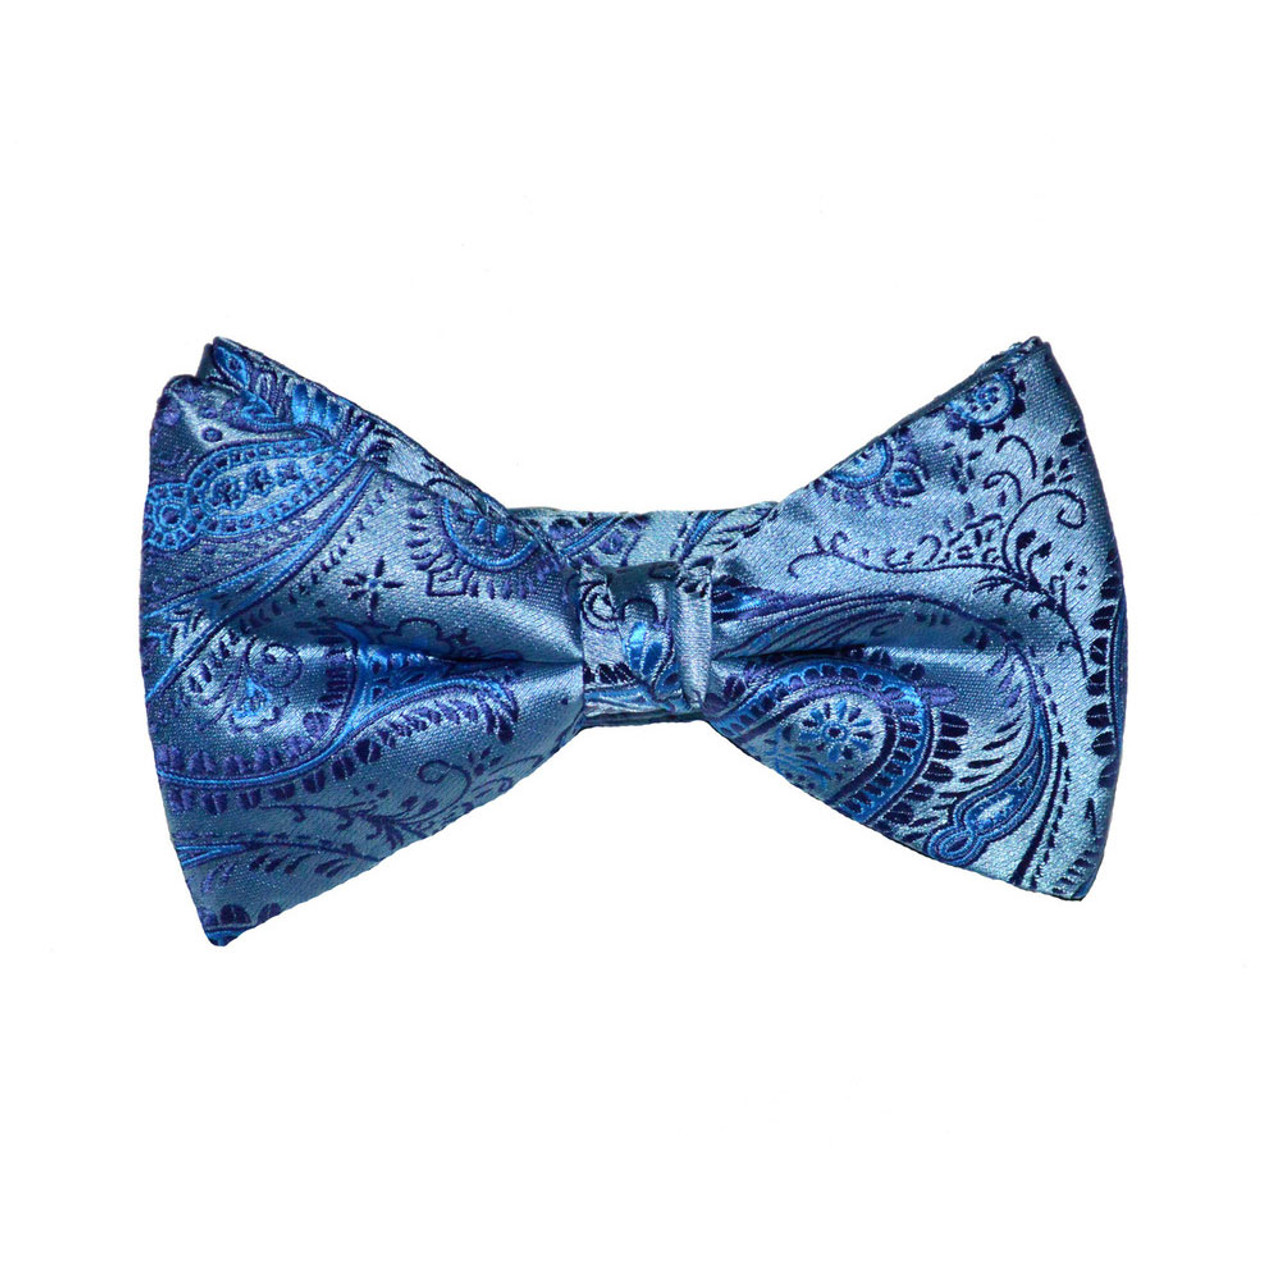 Paisley Bow Tie in Teal Blue | Smoky Joe's Clothing